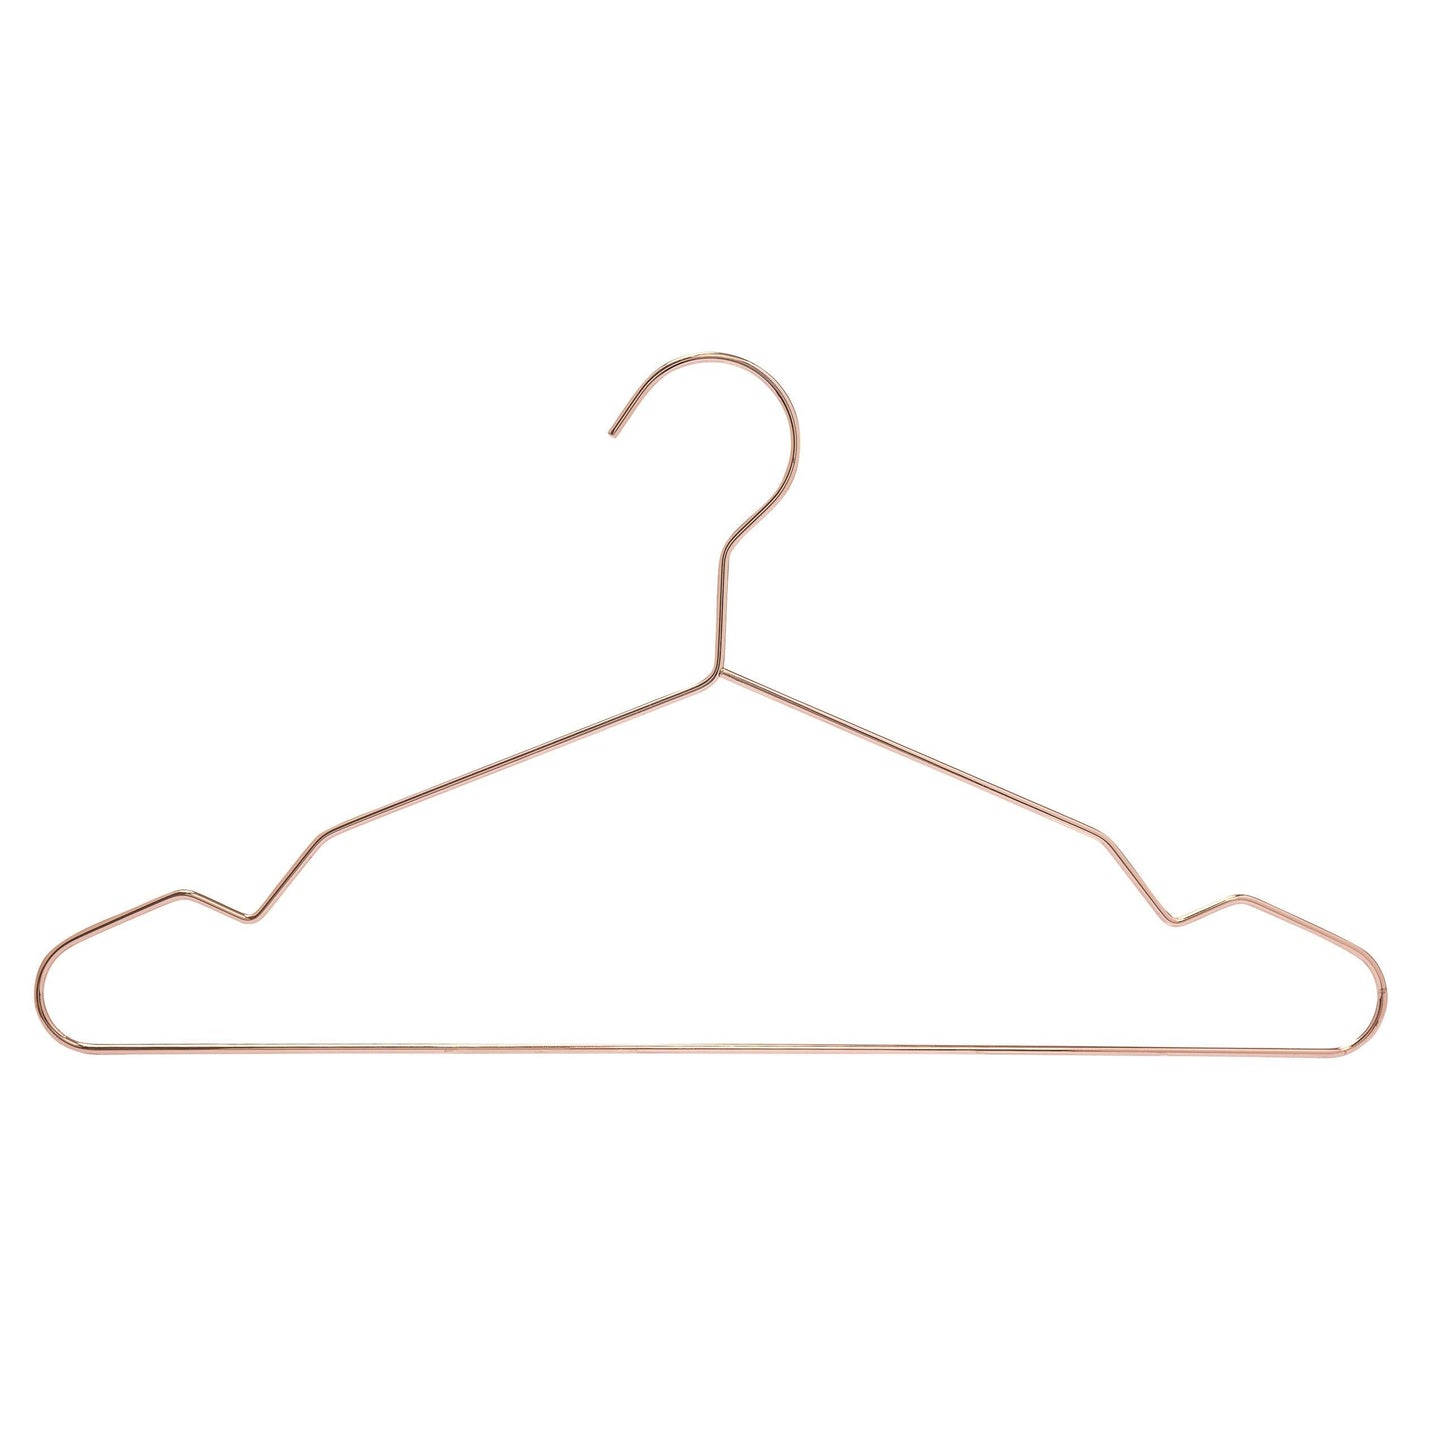 Rose Gold Metal Coat Hanger - 43CM X 3.5mm Thick - With Notches (Sold in Bundles of 25/50/100) - Hangersforless